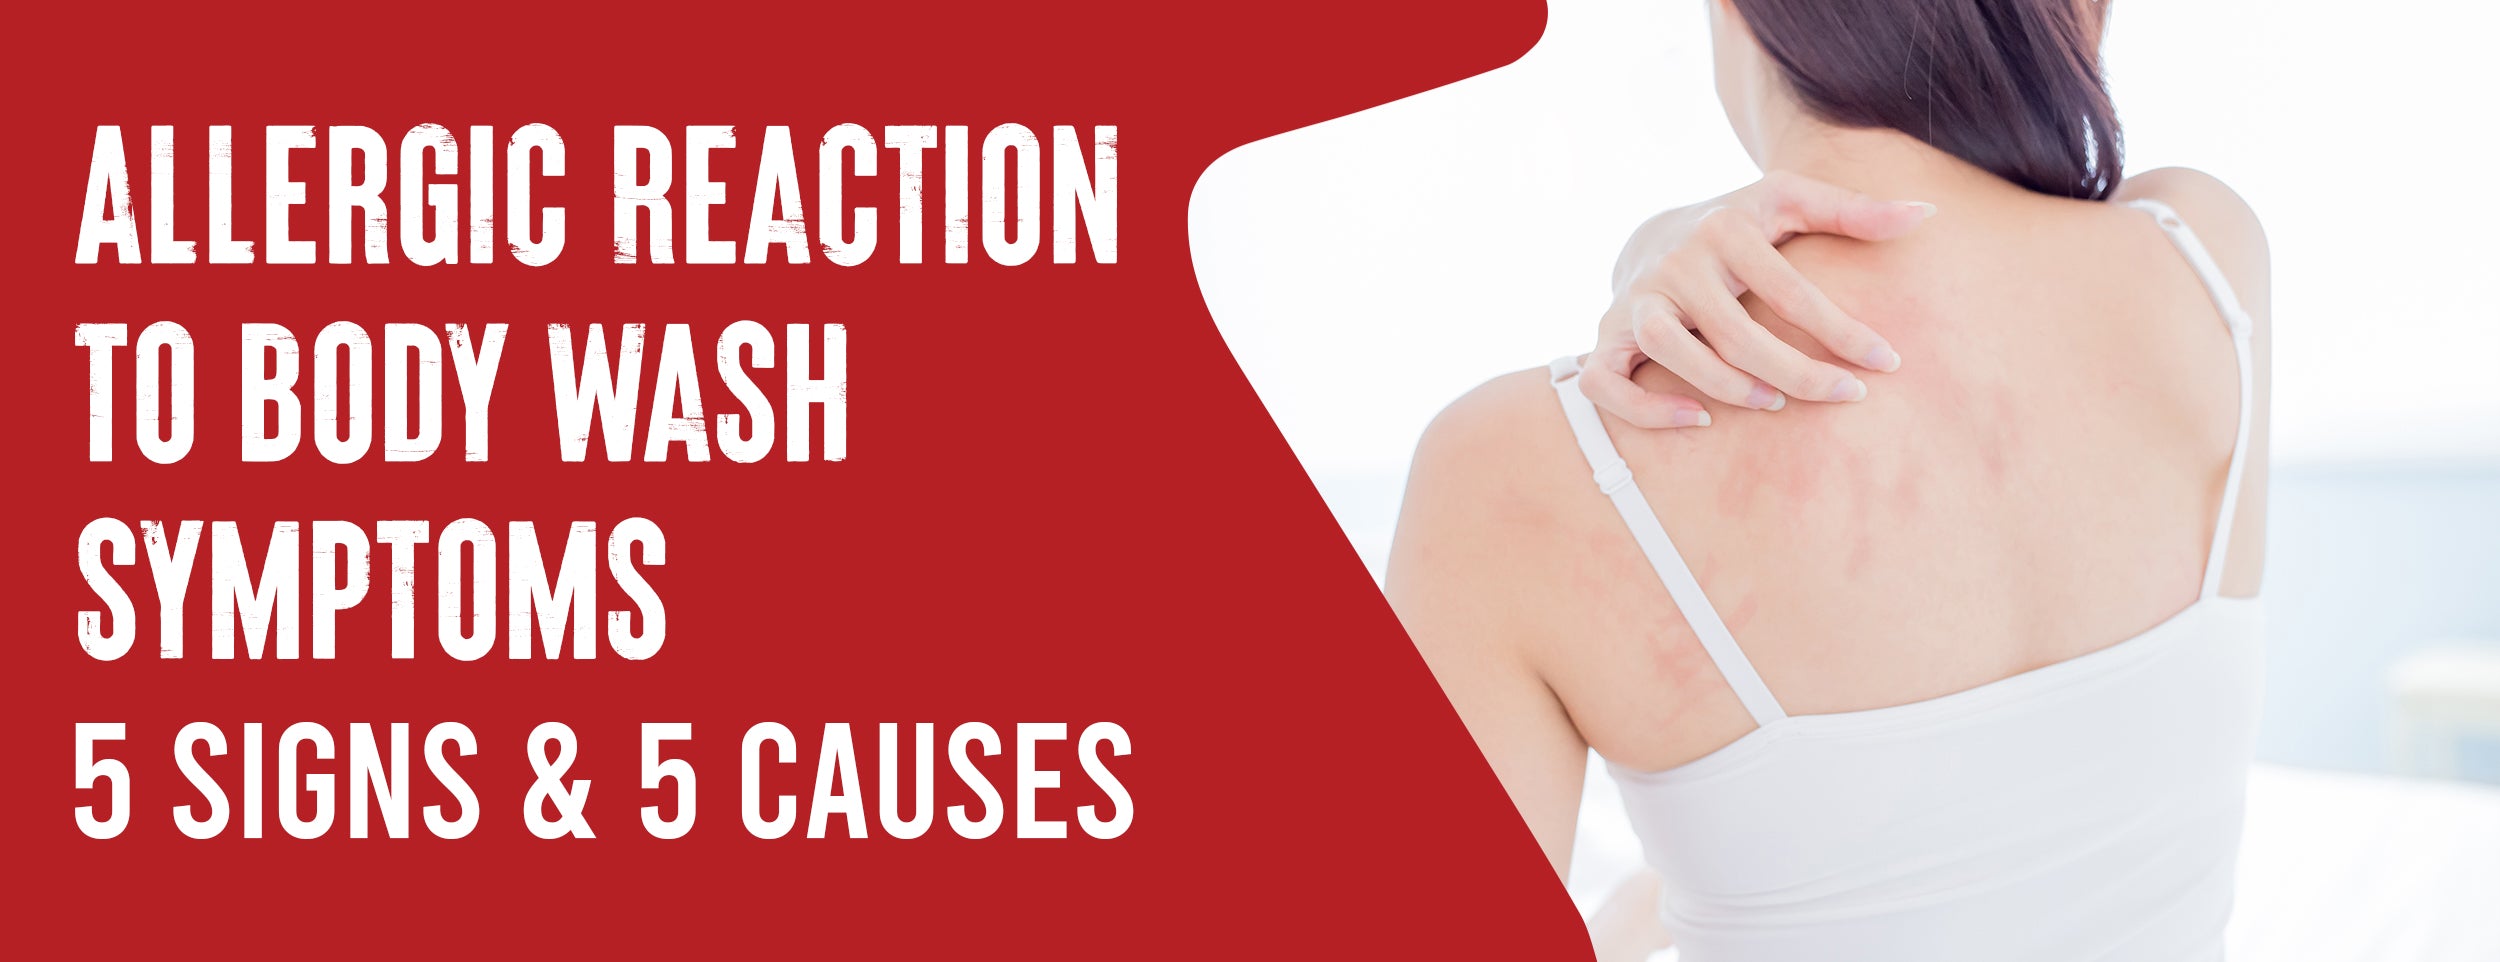 Body Wash Allergic Reaction Symptoms: Signs & Causes